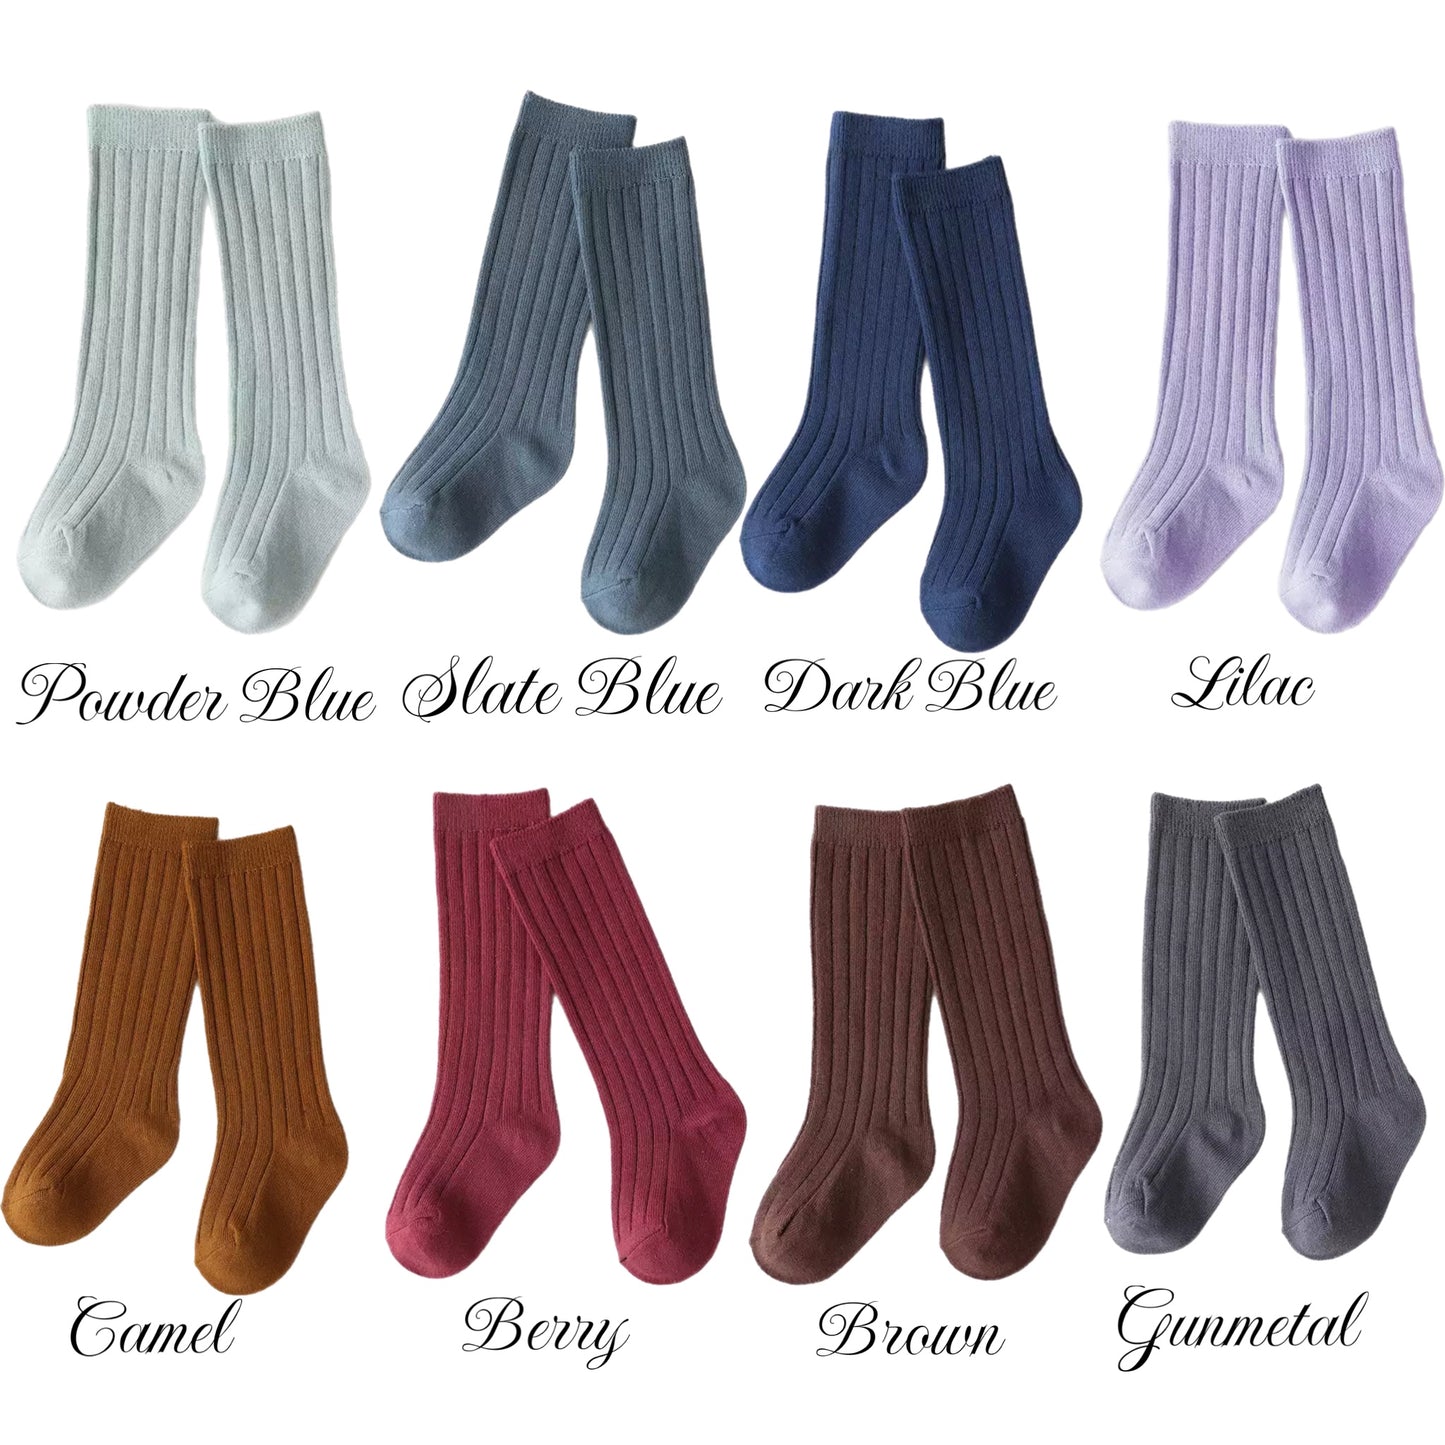 PREORDER Basic Knee Highs (16 colors) CLOSES 9/23